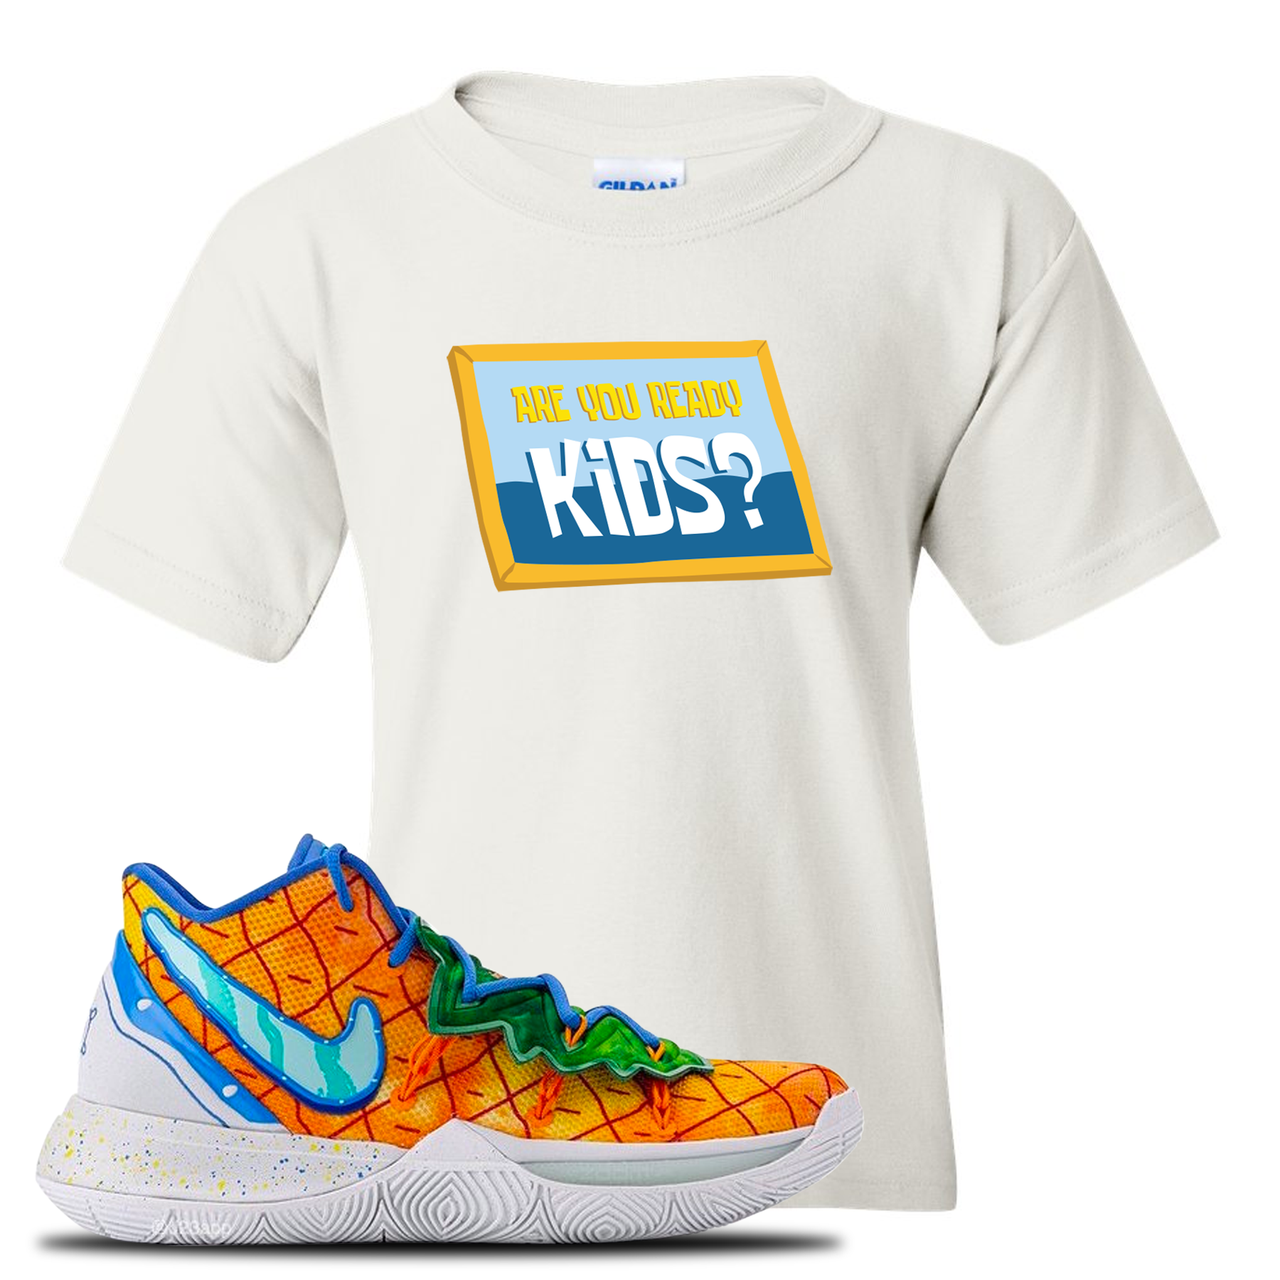 Kyrie 5 Pineapple House Are You Ready Kids? White Sneaker Hook Up Kid's T-Shirt